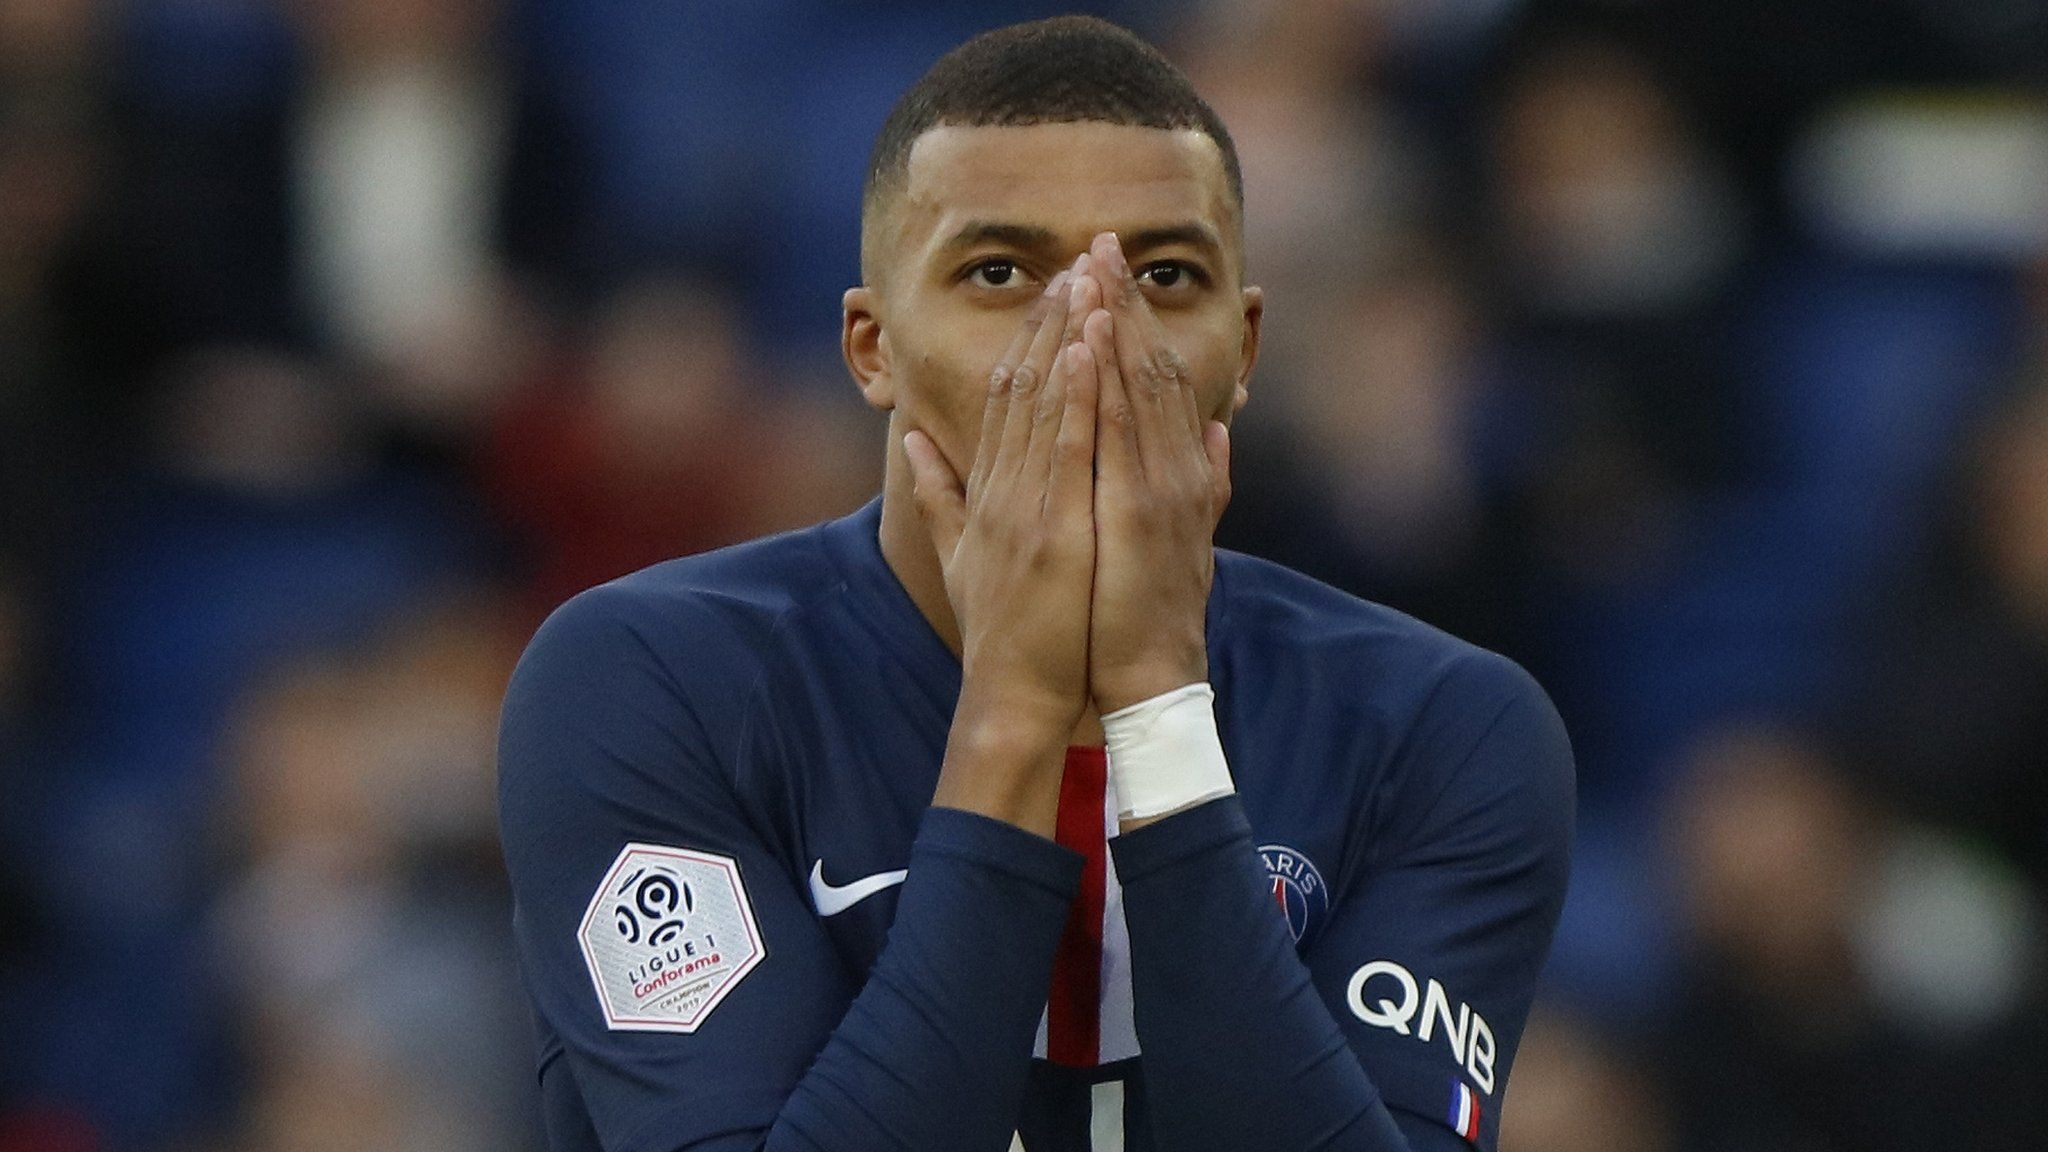 PSG forward Kylian Mbappe puts his hands over his mouth